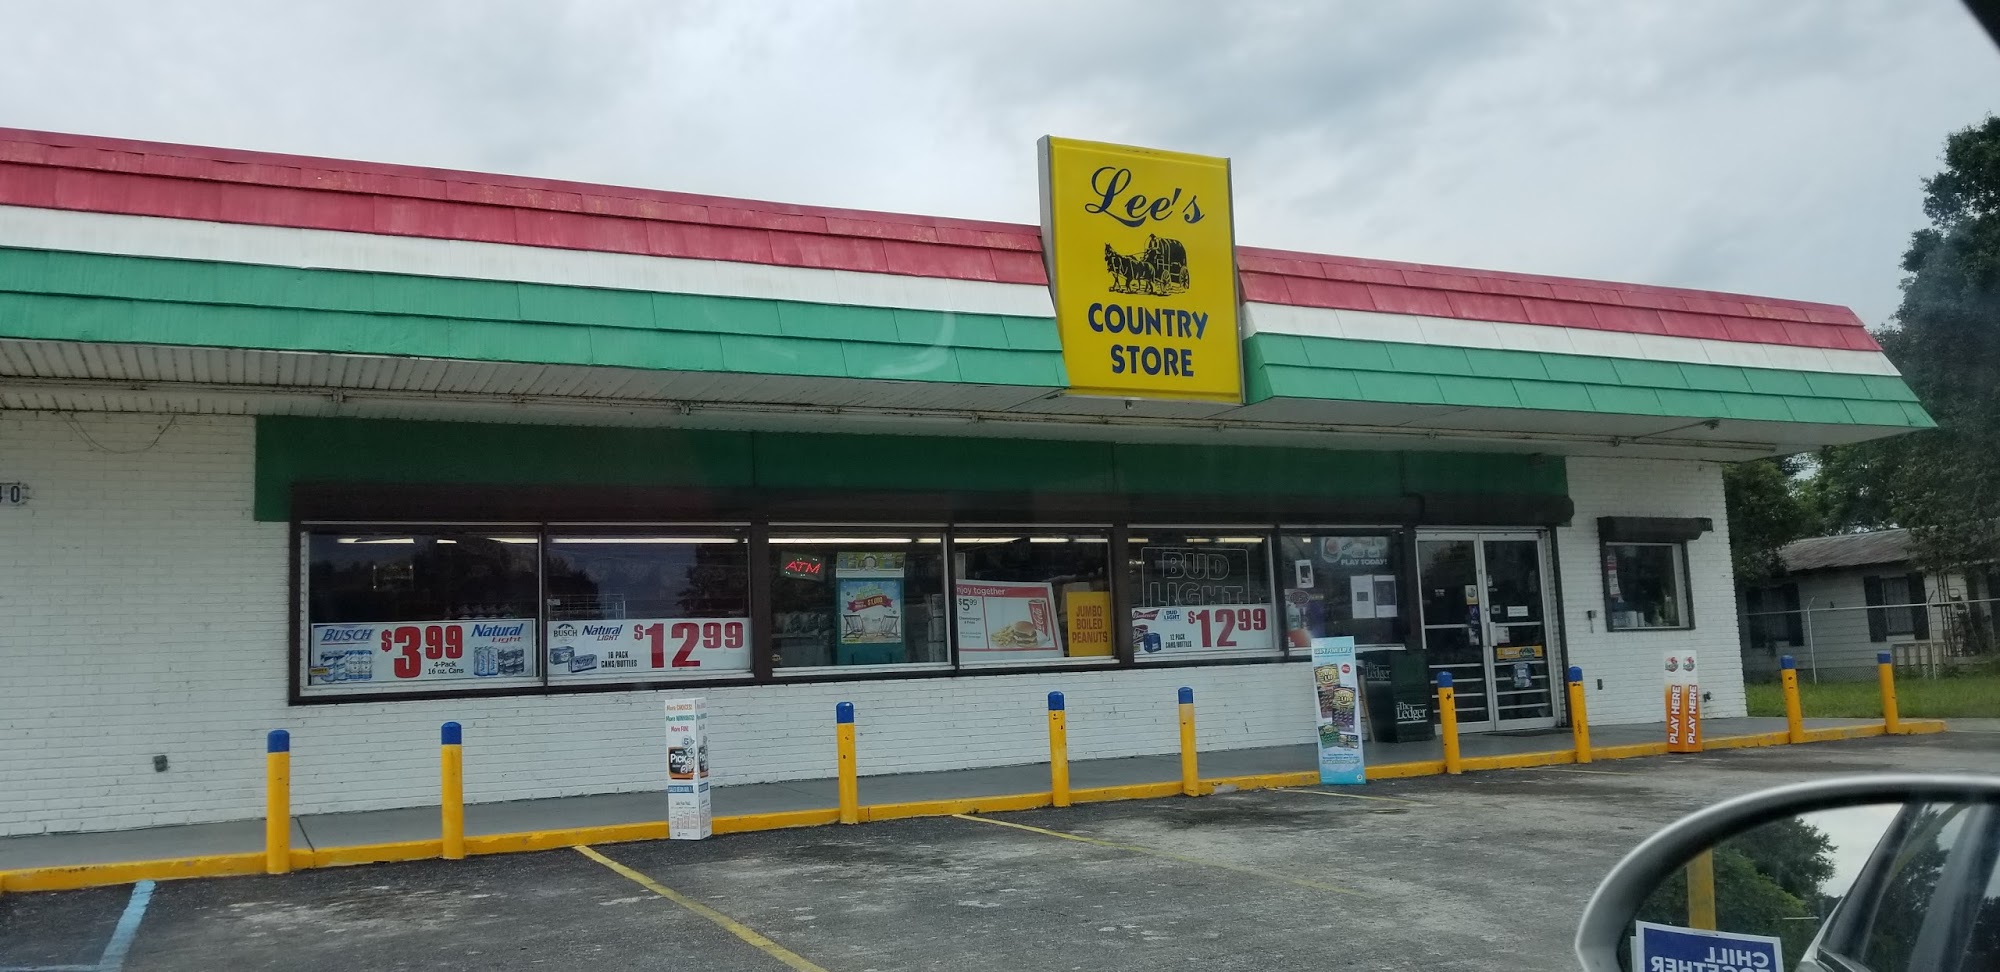 Lee's Country Store